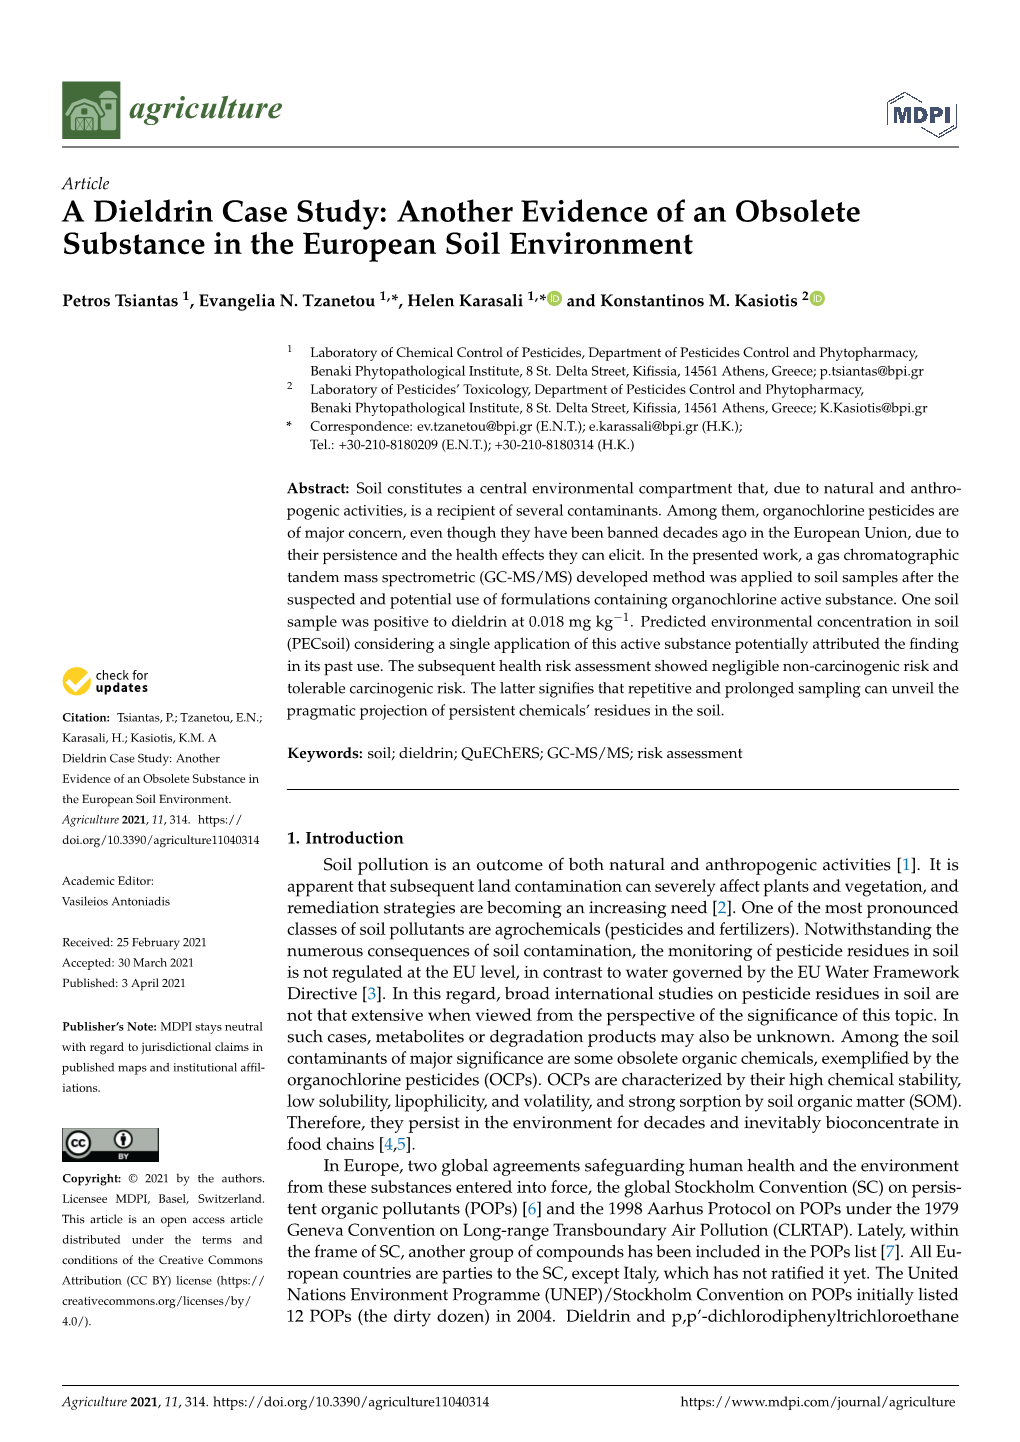 A Dieldrin Case Study: Another Evidence of an Obsolete Substance in the European Soil Environment